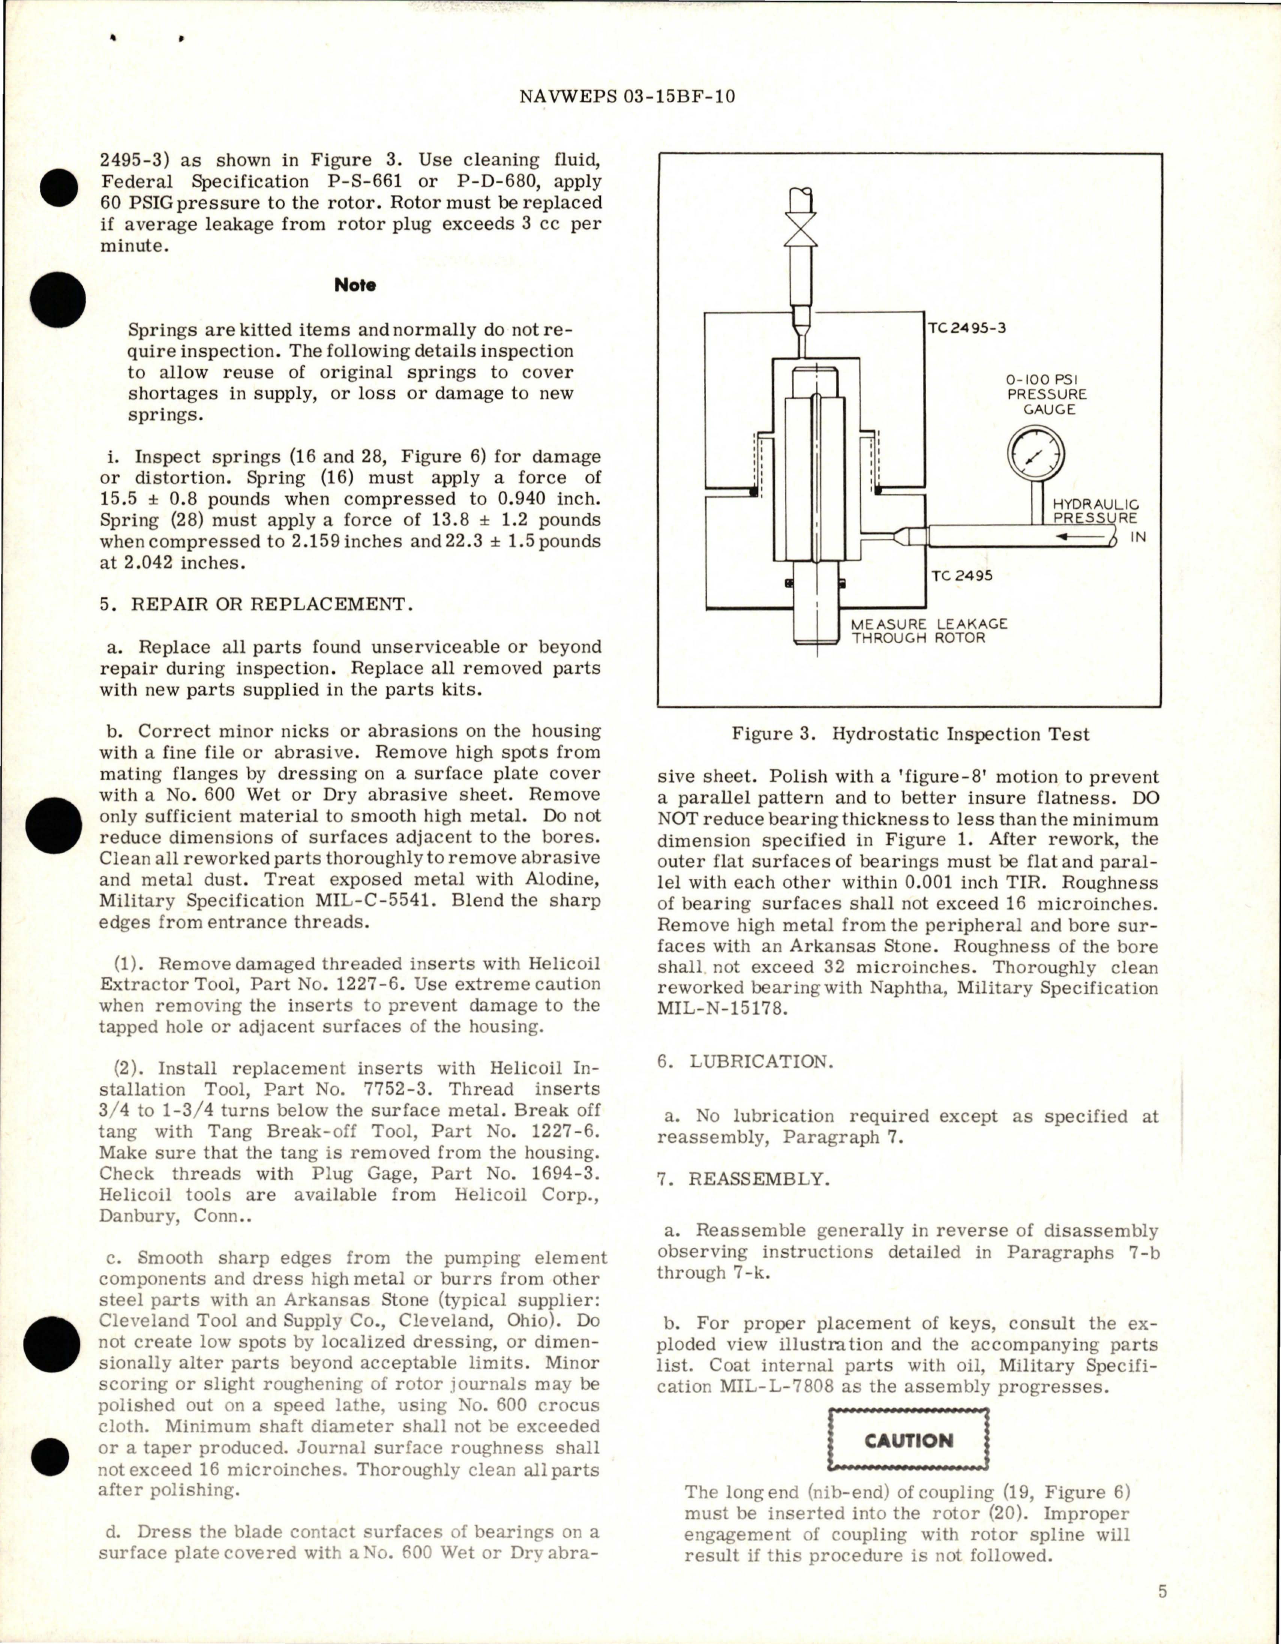 Sample page 7 from AirCorps Library document: Overhaul Instructions with Parts Breakdown for Main Lube Pump - LSI Model RR16730A and RR16730D